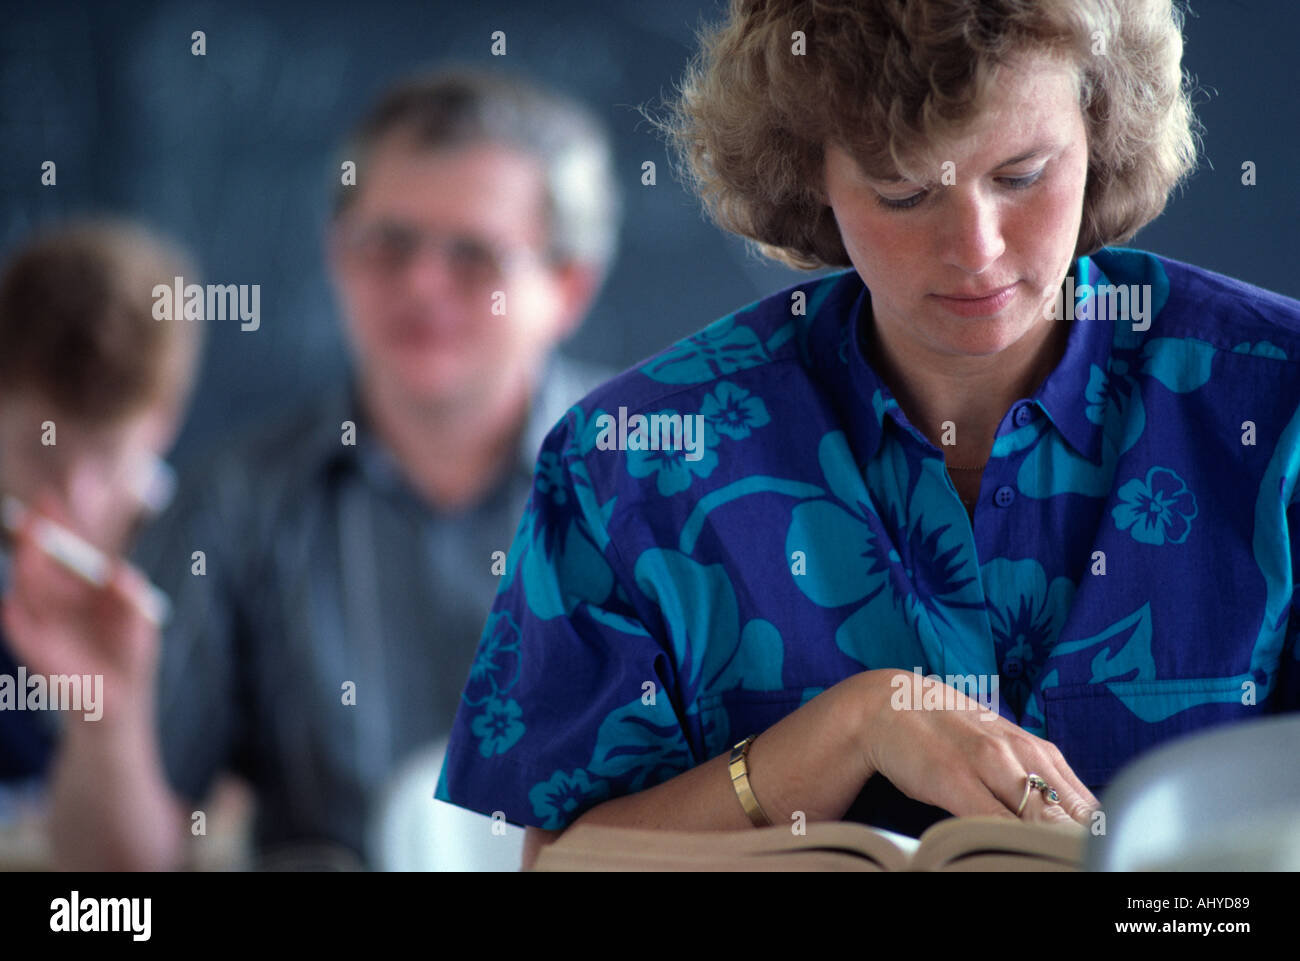 Caucasian woman studying in adult education class Stock Photo